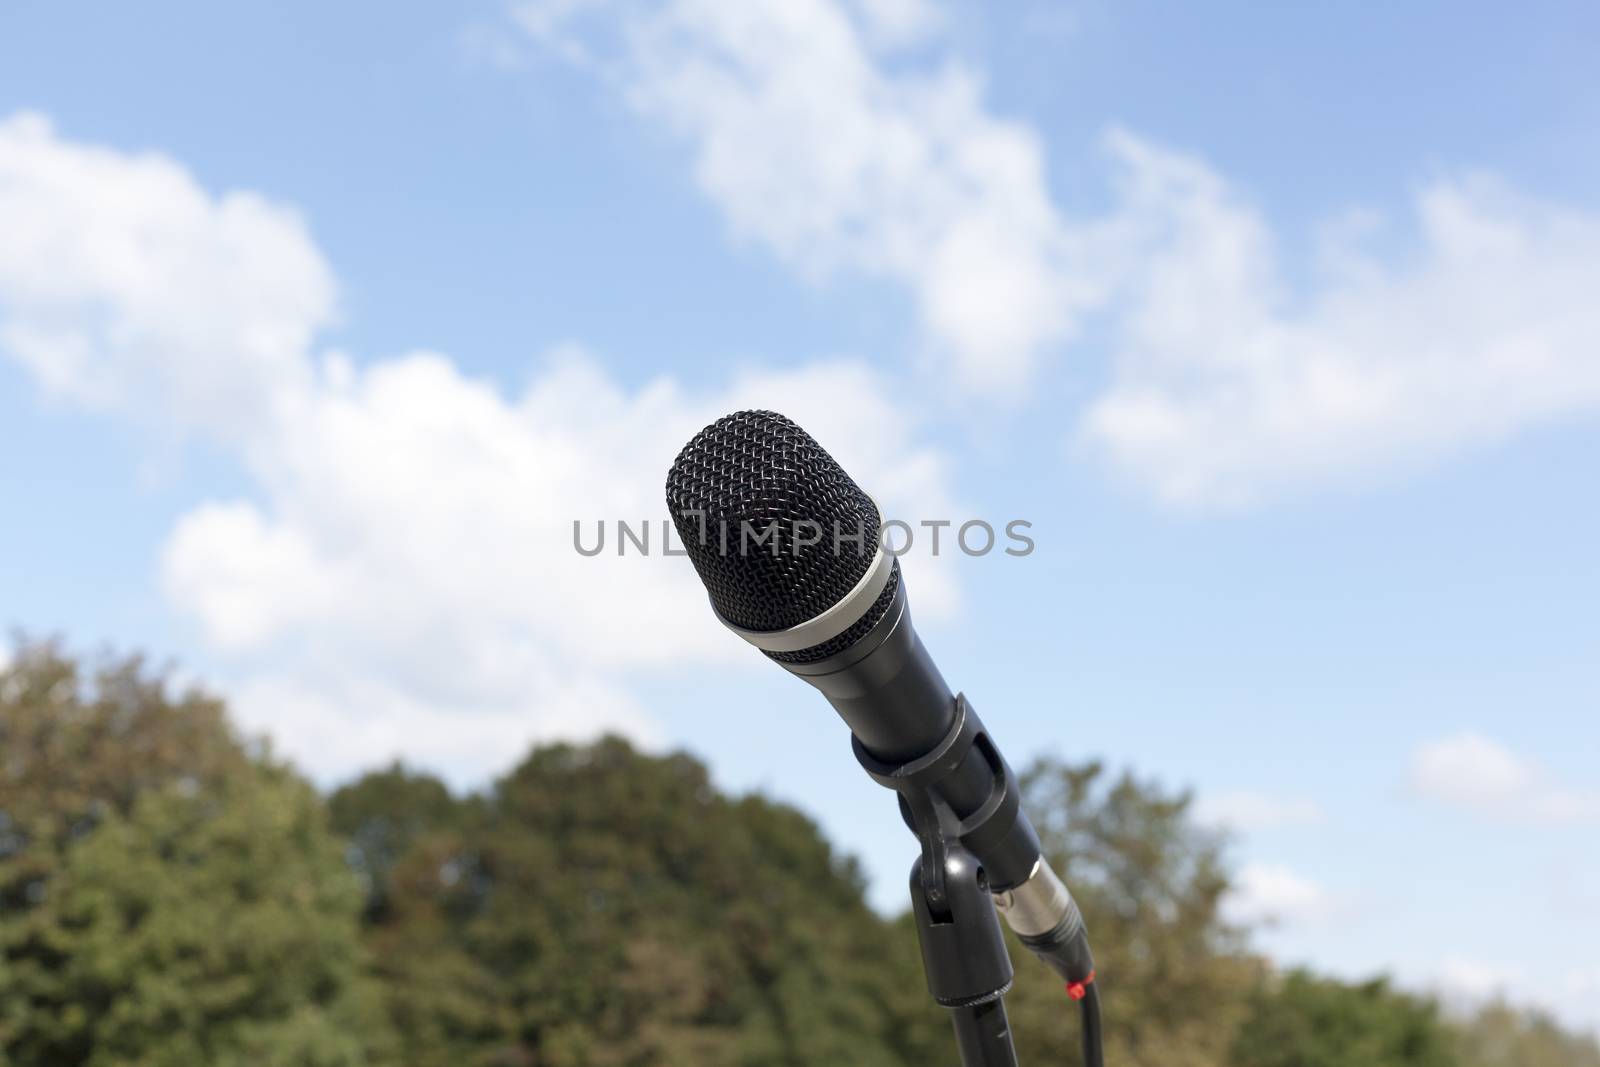 Microphone in focus against blurred trees and sky